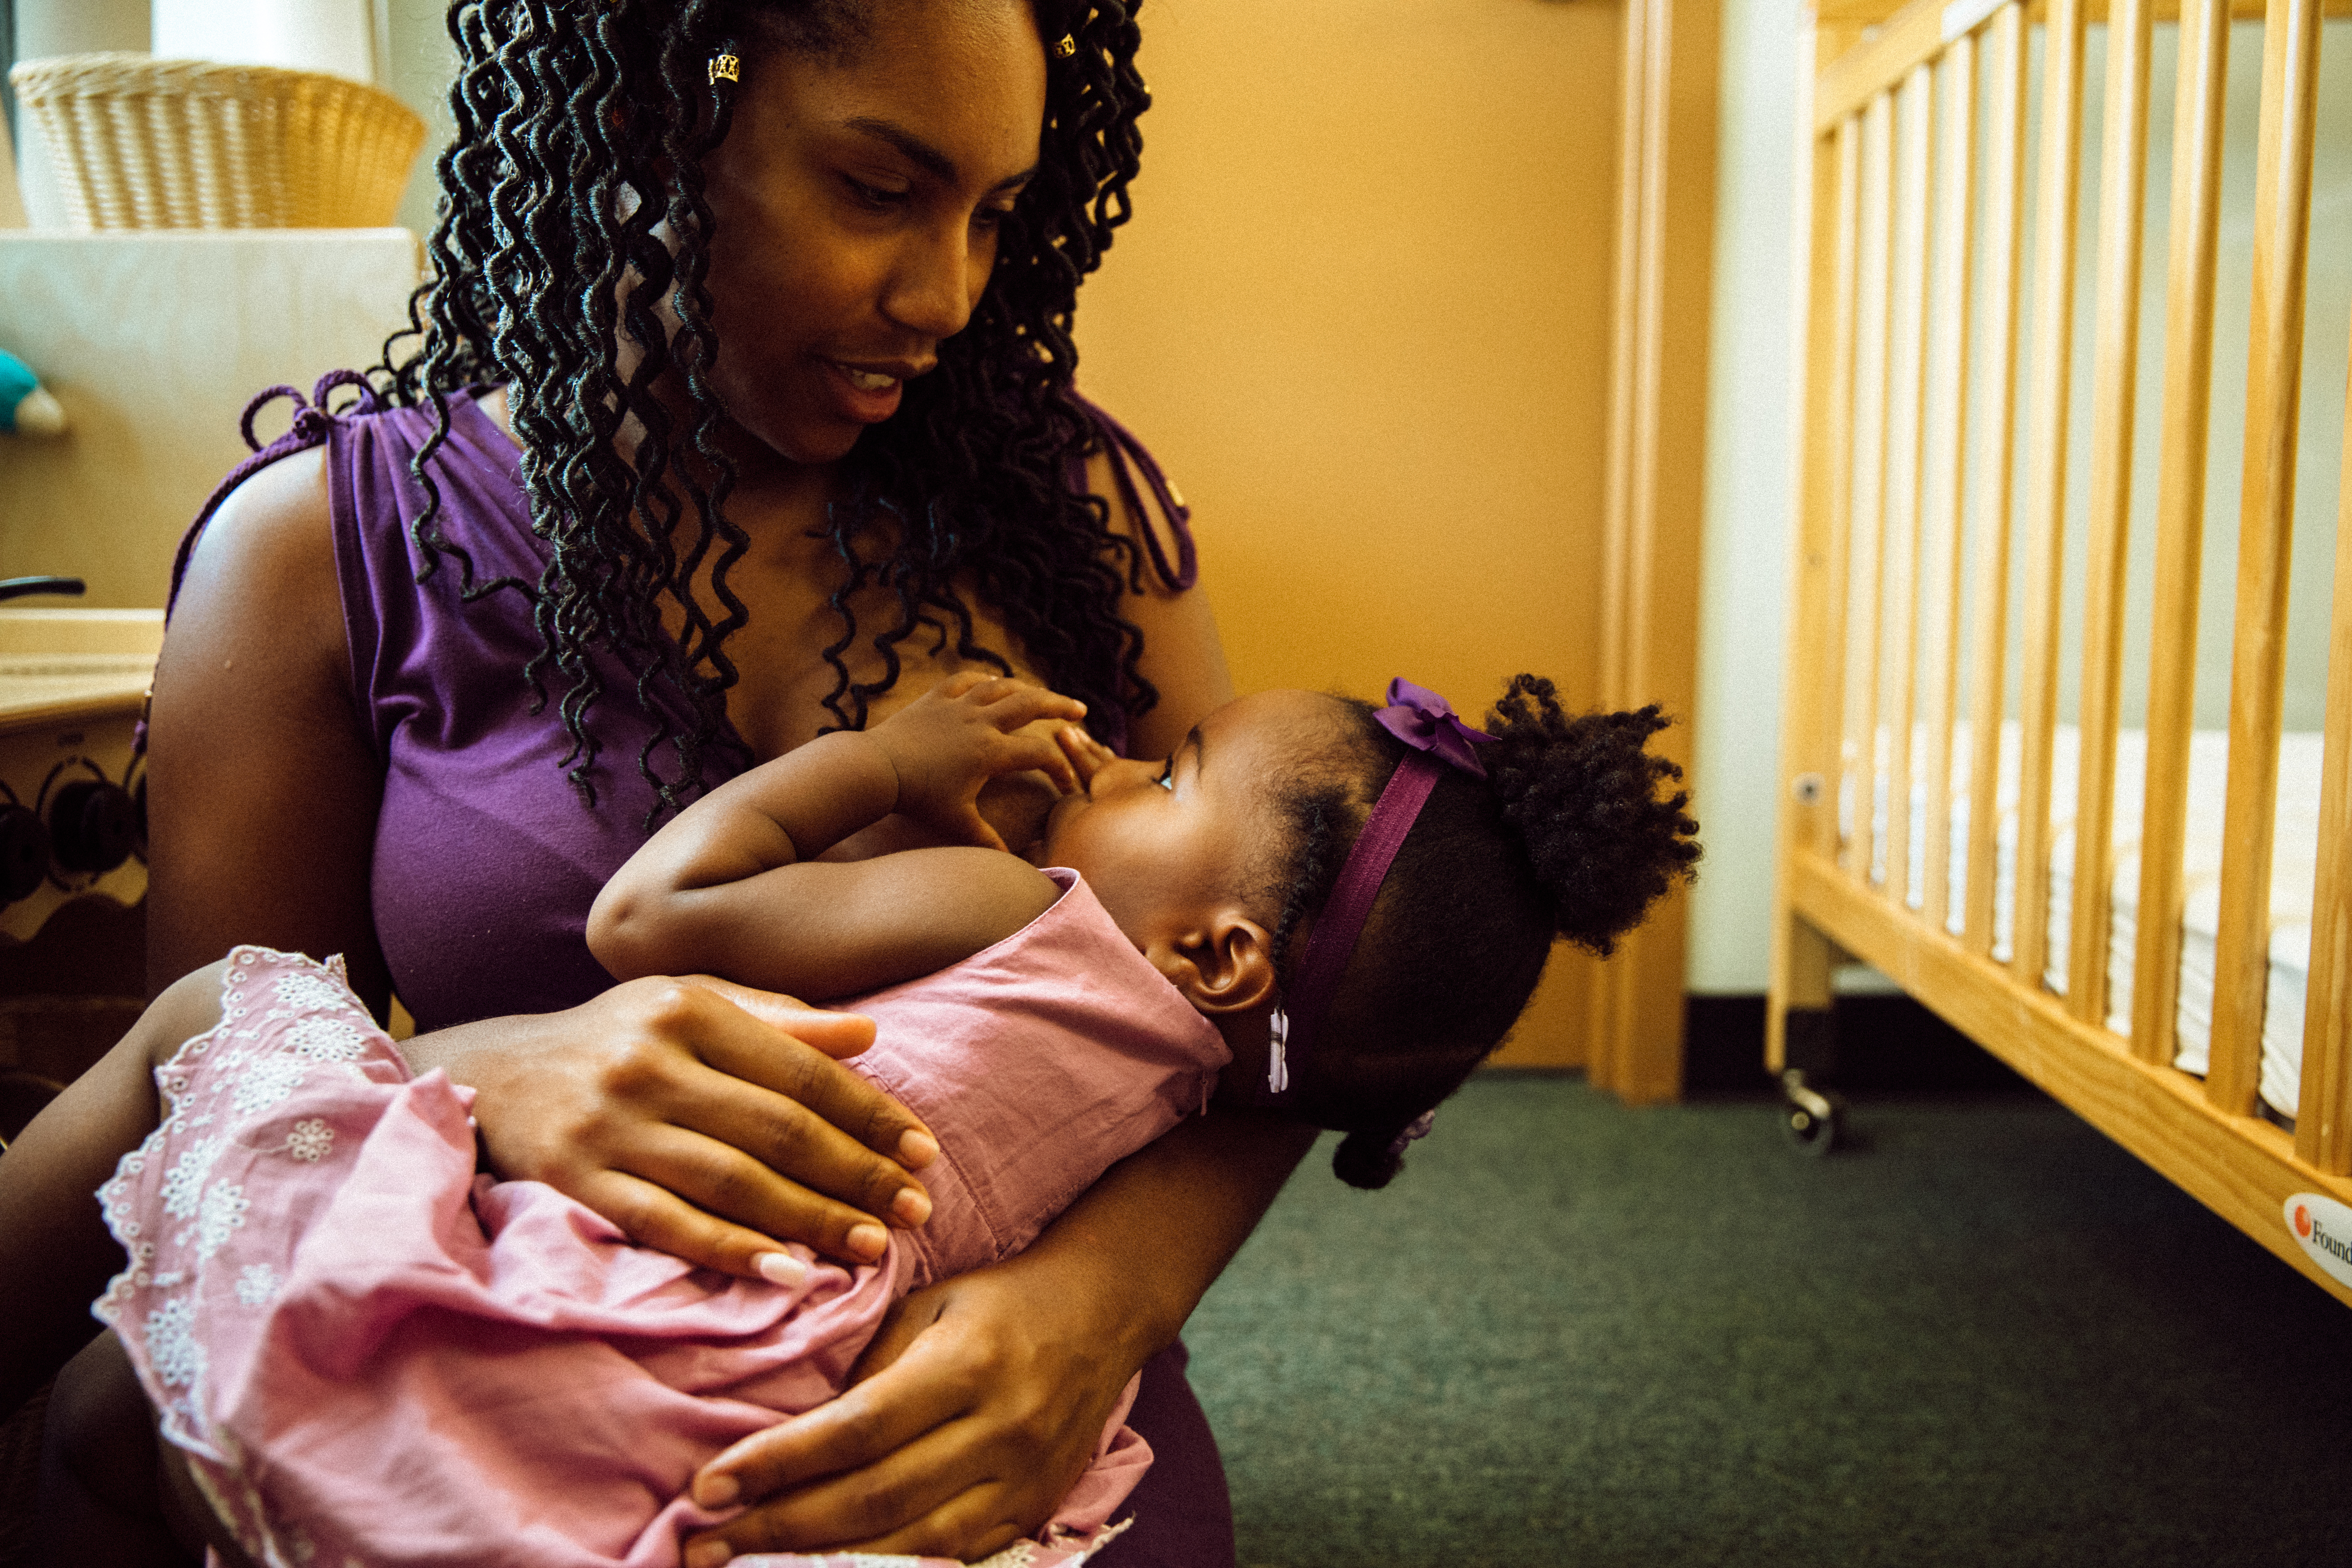 Victoria Washington kneels while holding and breastfeeding her toddler daughter at Focus: HOPE